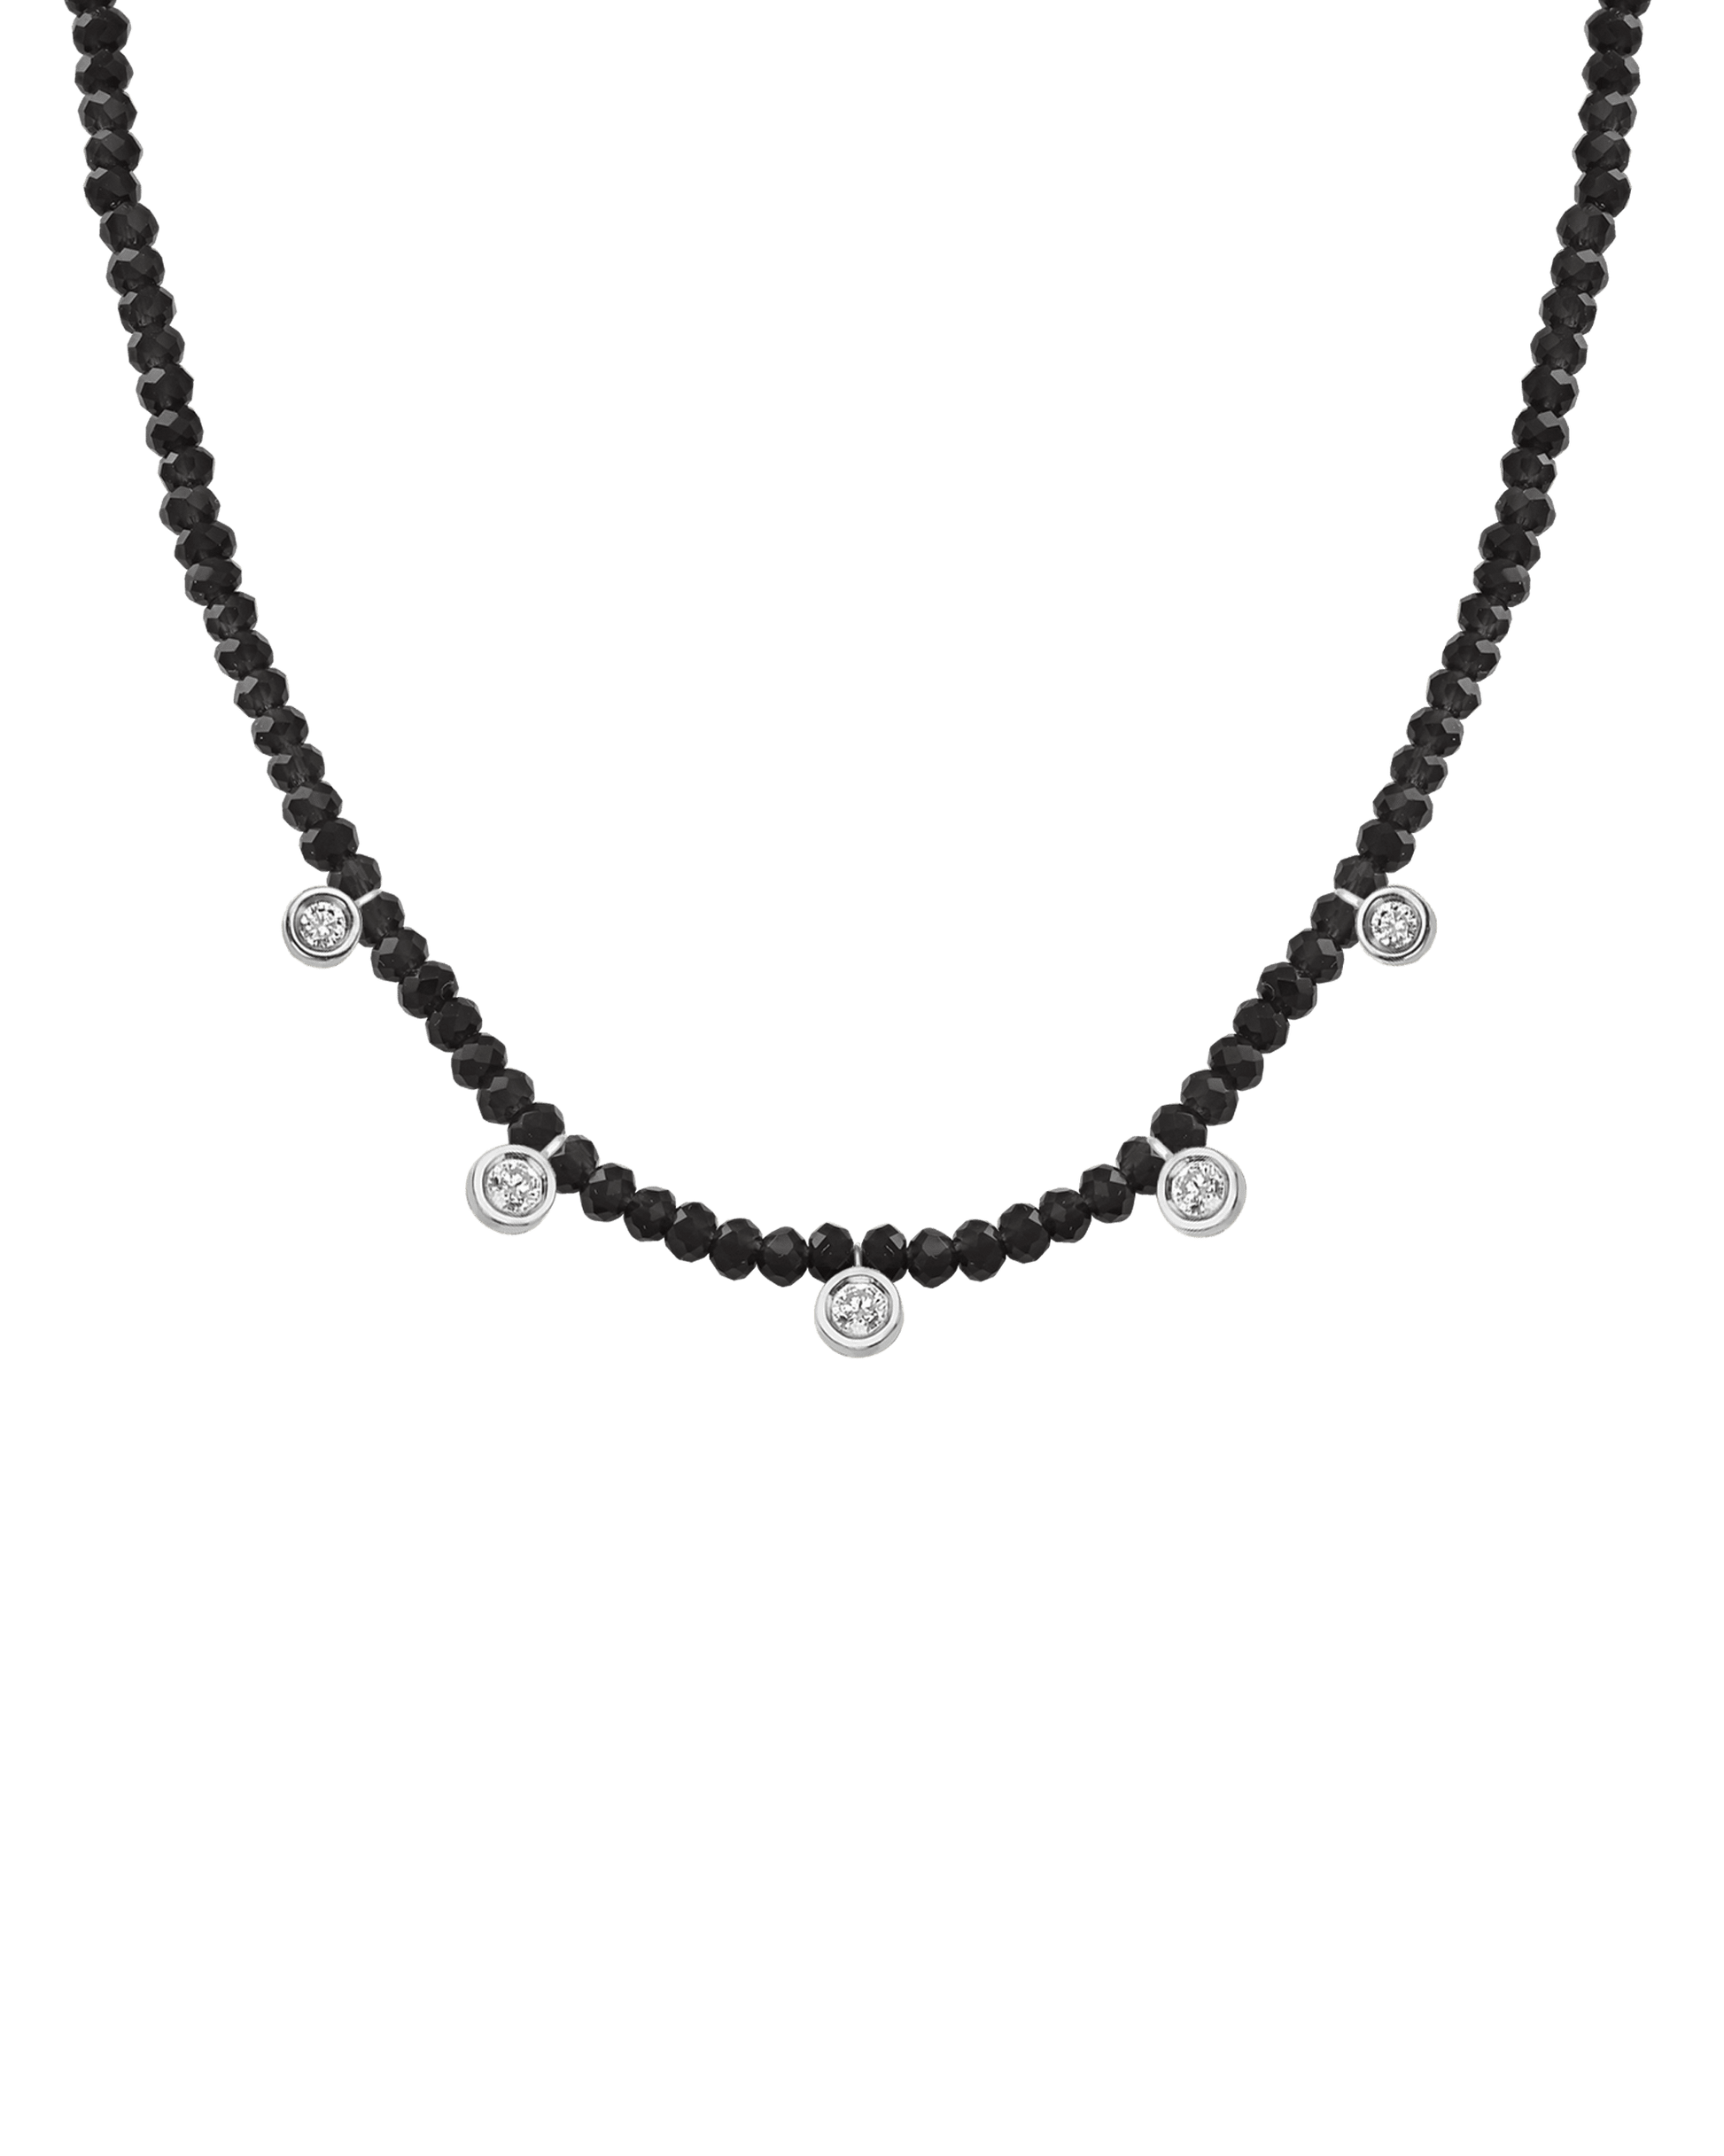 Jade Gemstone & Five diamonds Necklace - 14K White Gold Necklaces magal-dev Glass Beads Black Spinnel 14" - Collar 